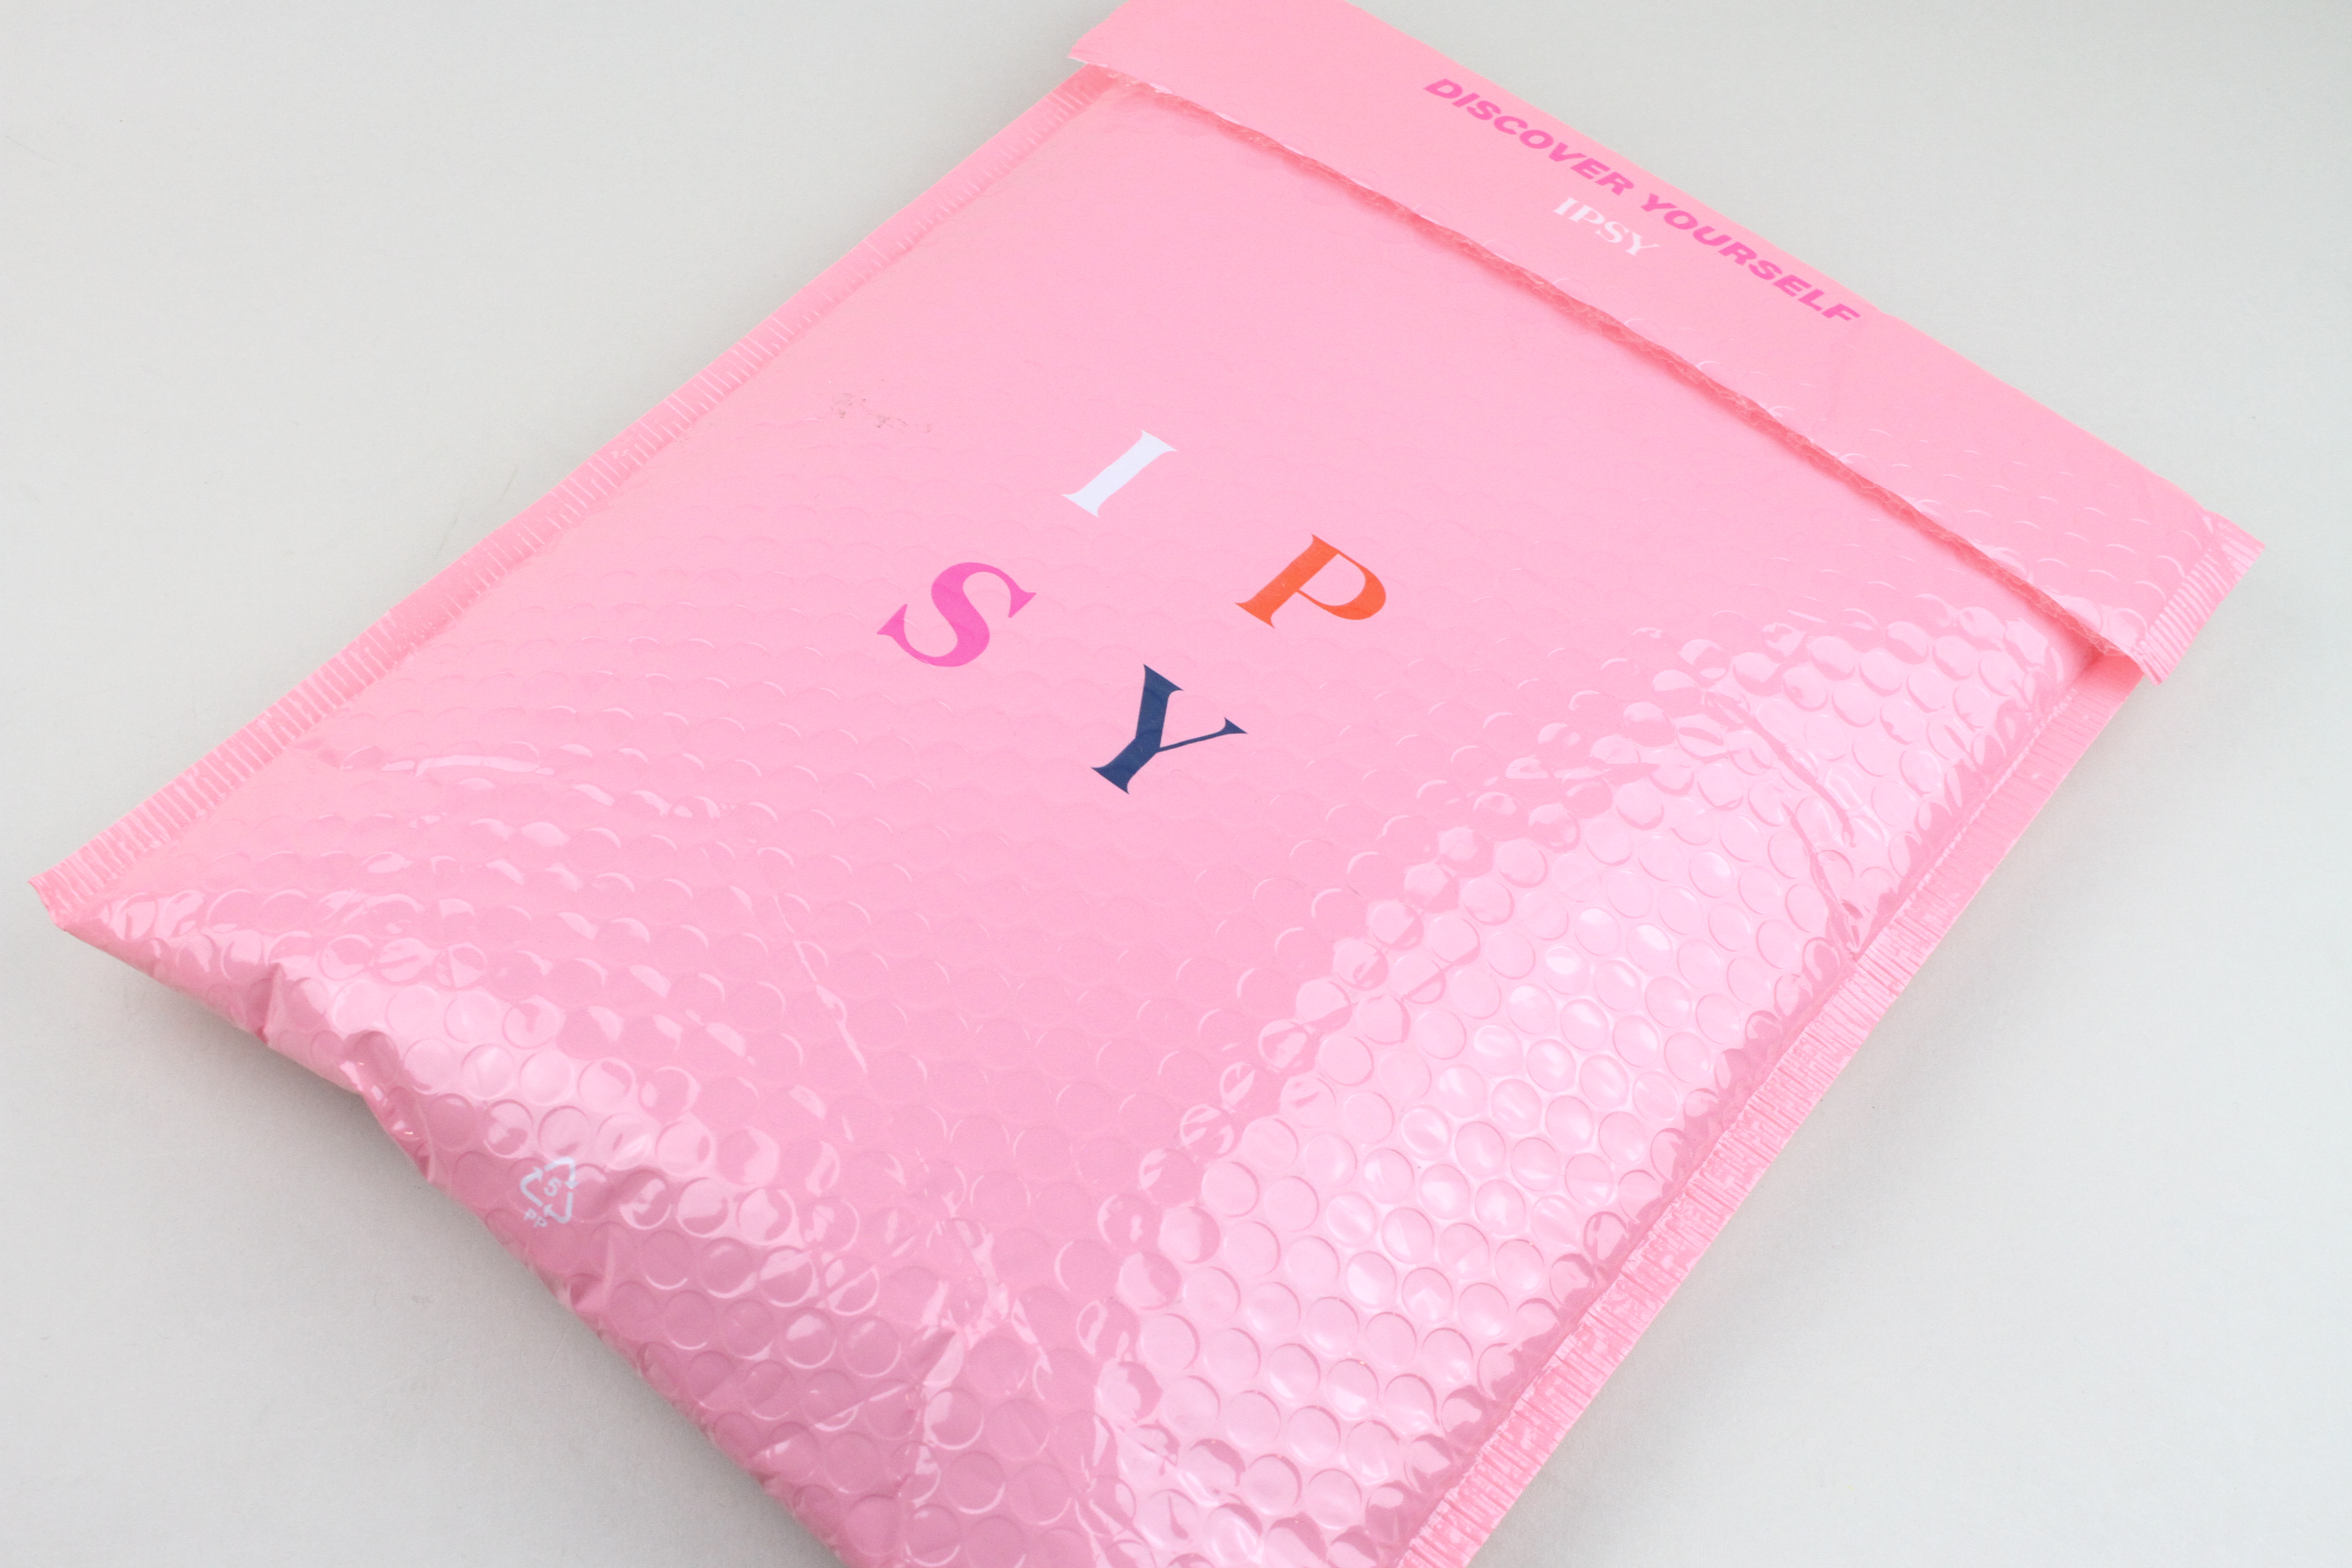 Ipsy Glam Bag Plus January 2021 Review